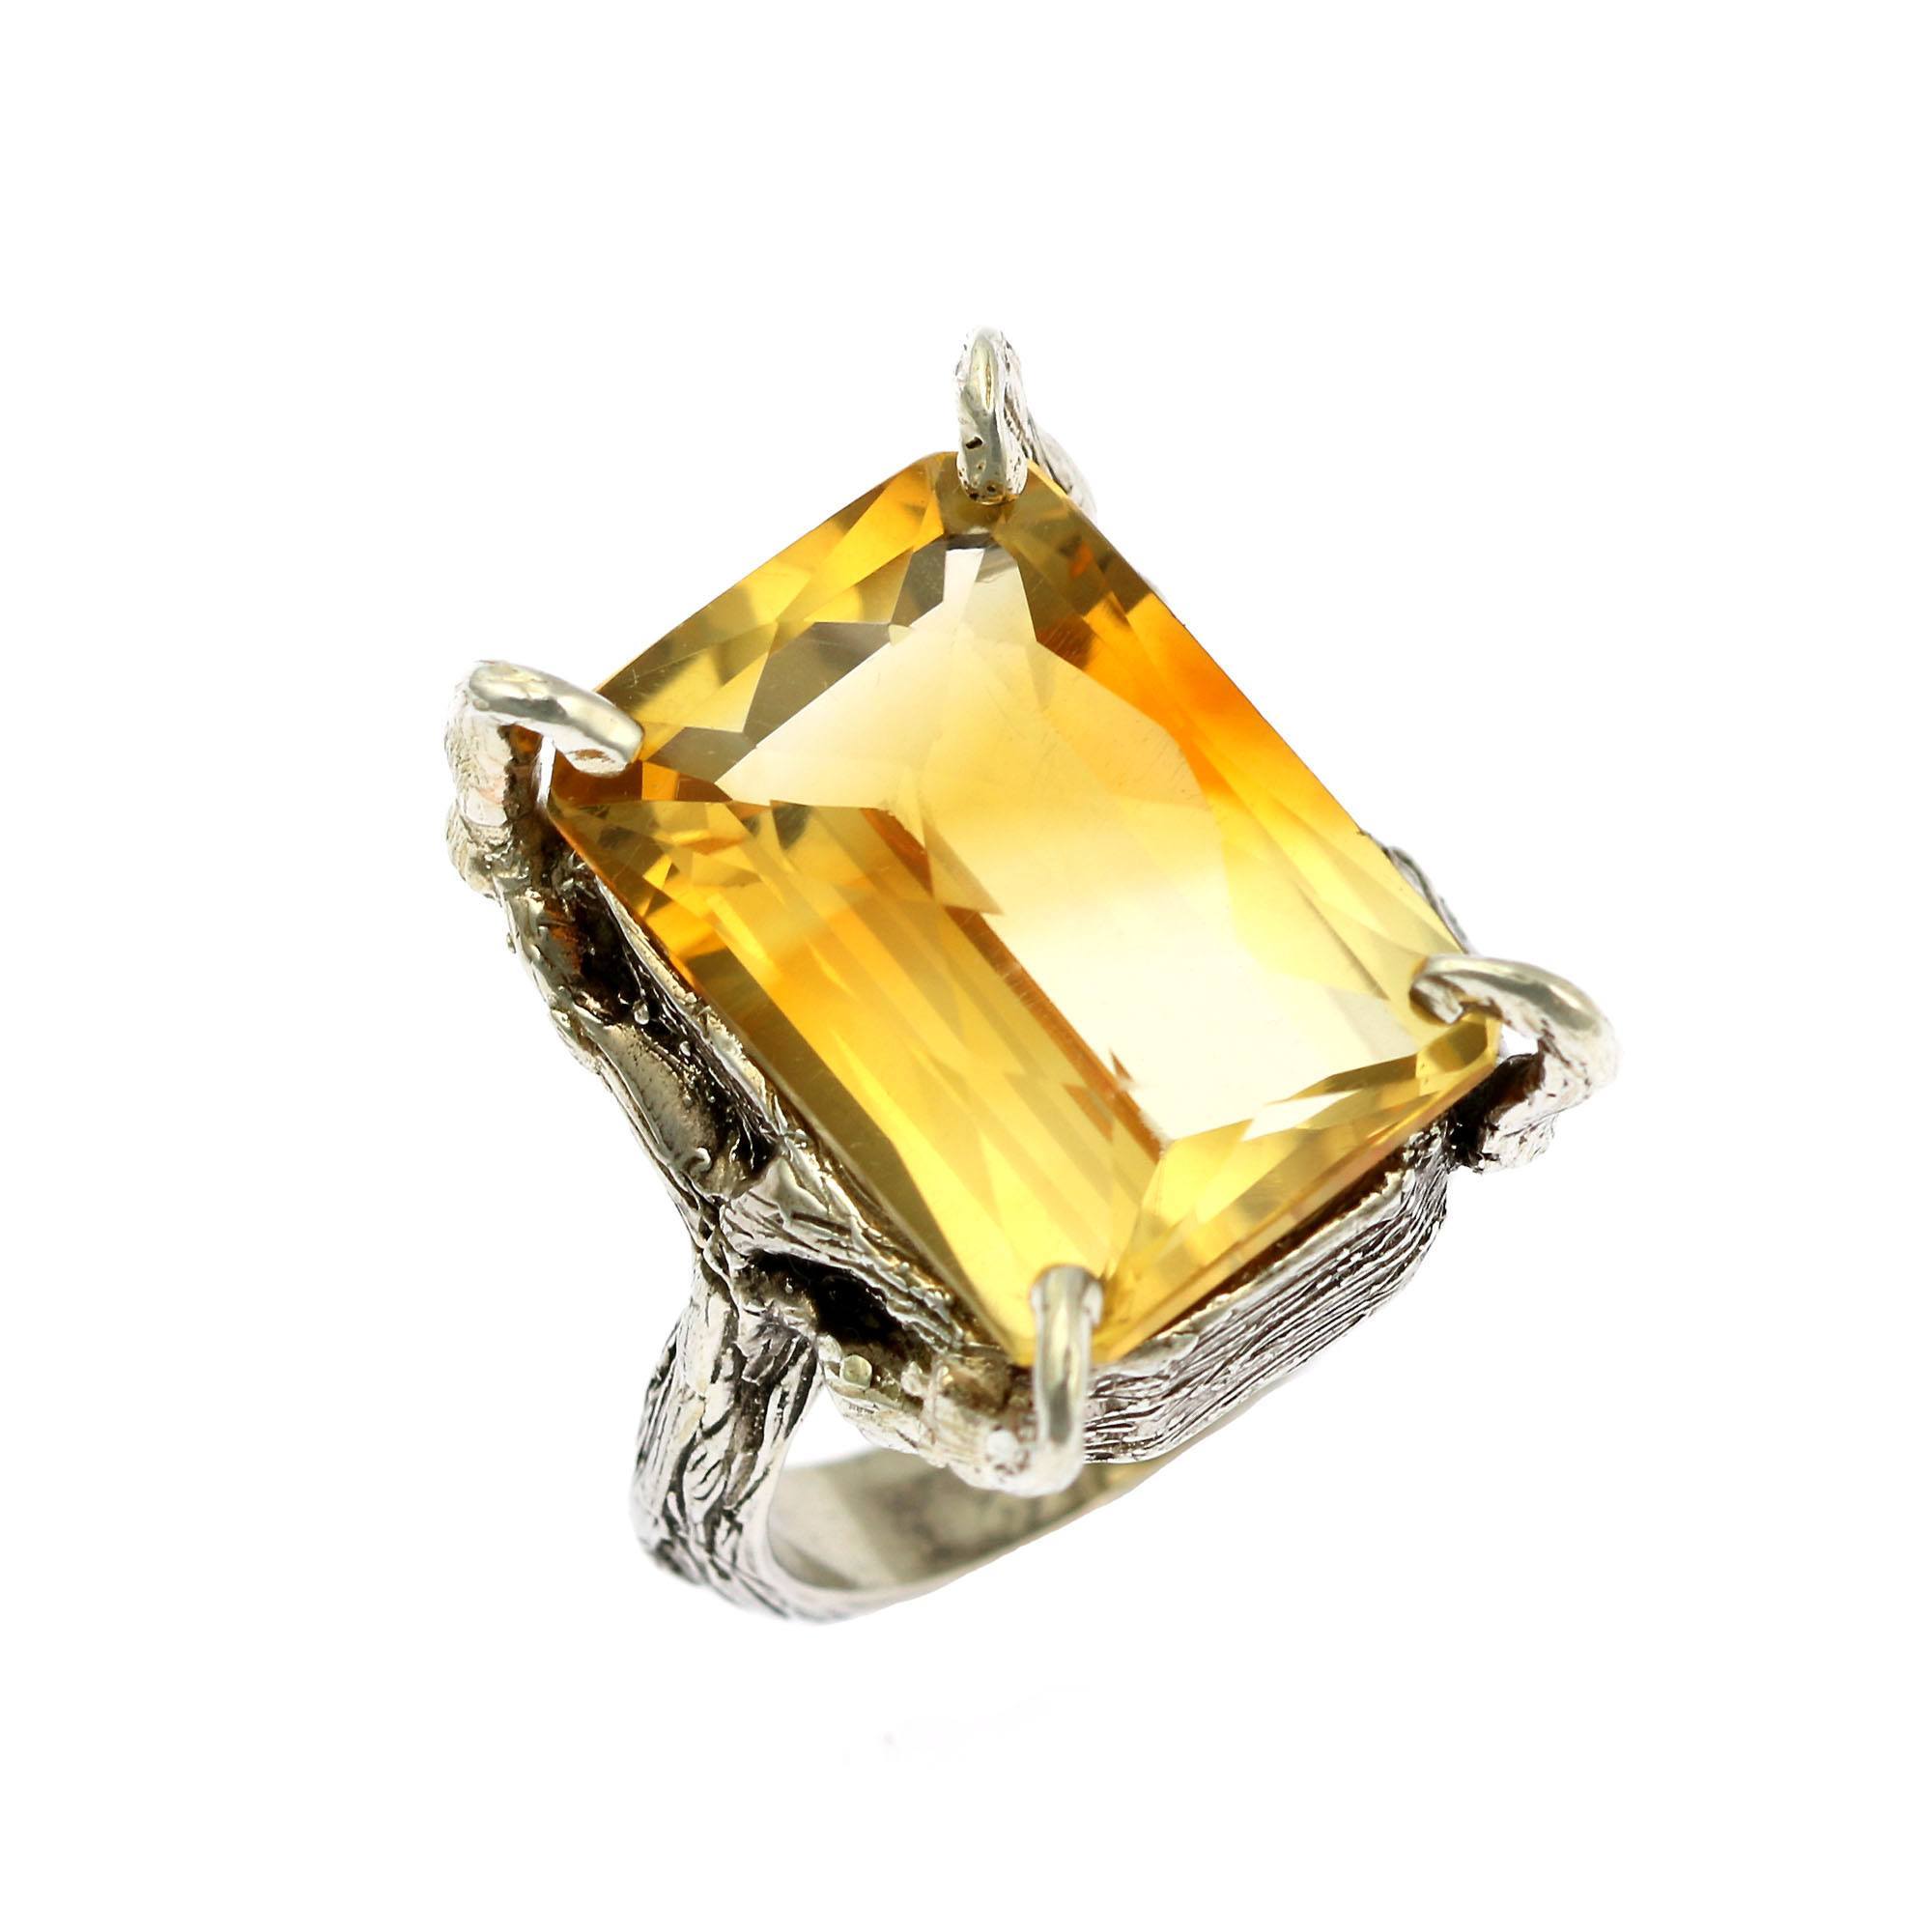 21.5 Ct Checkboard Cut Citrine Sterling Silver Cocktail Ring